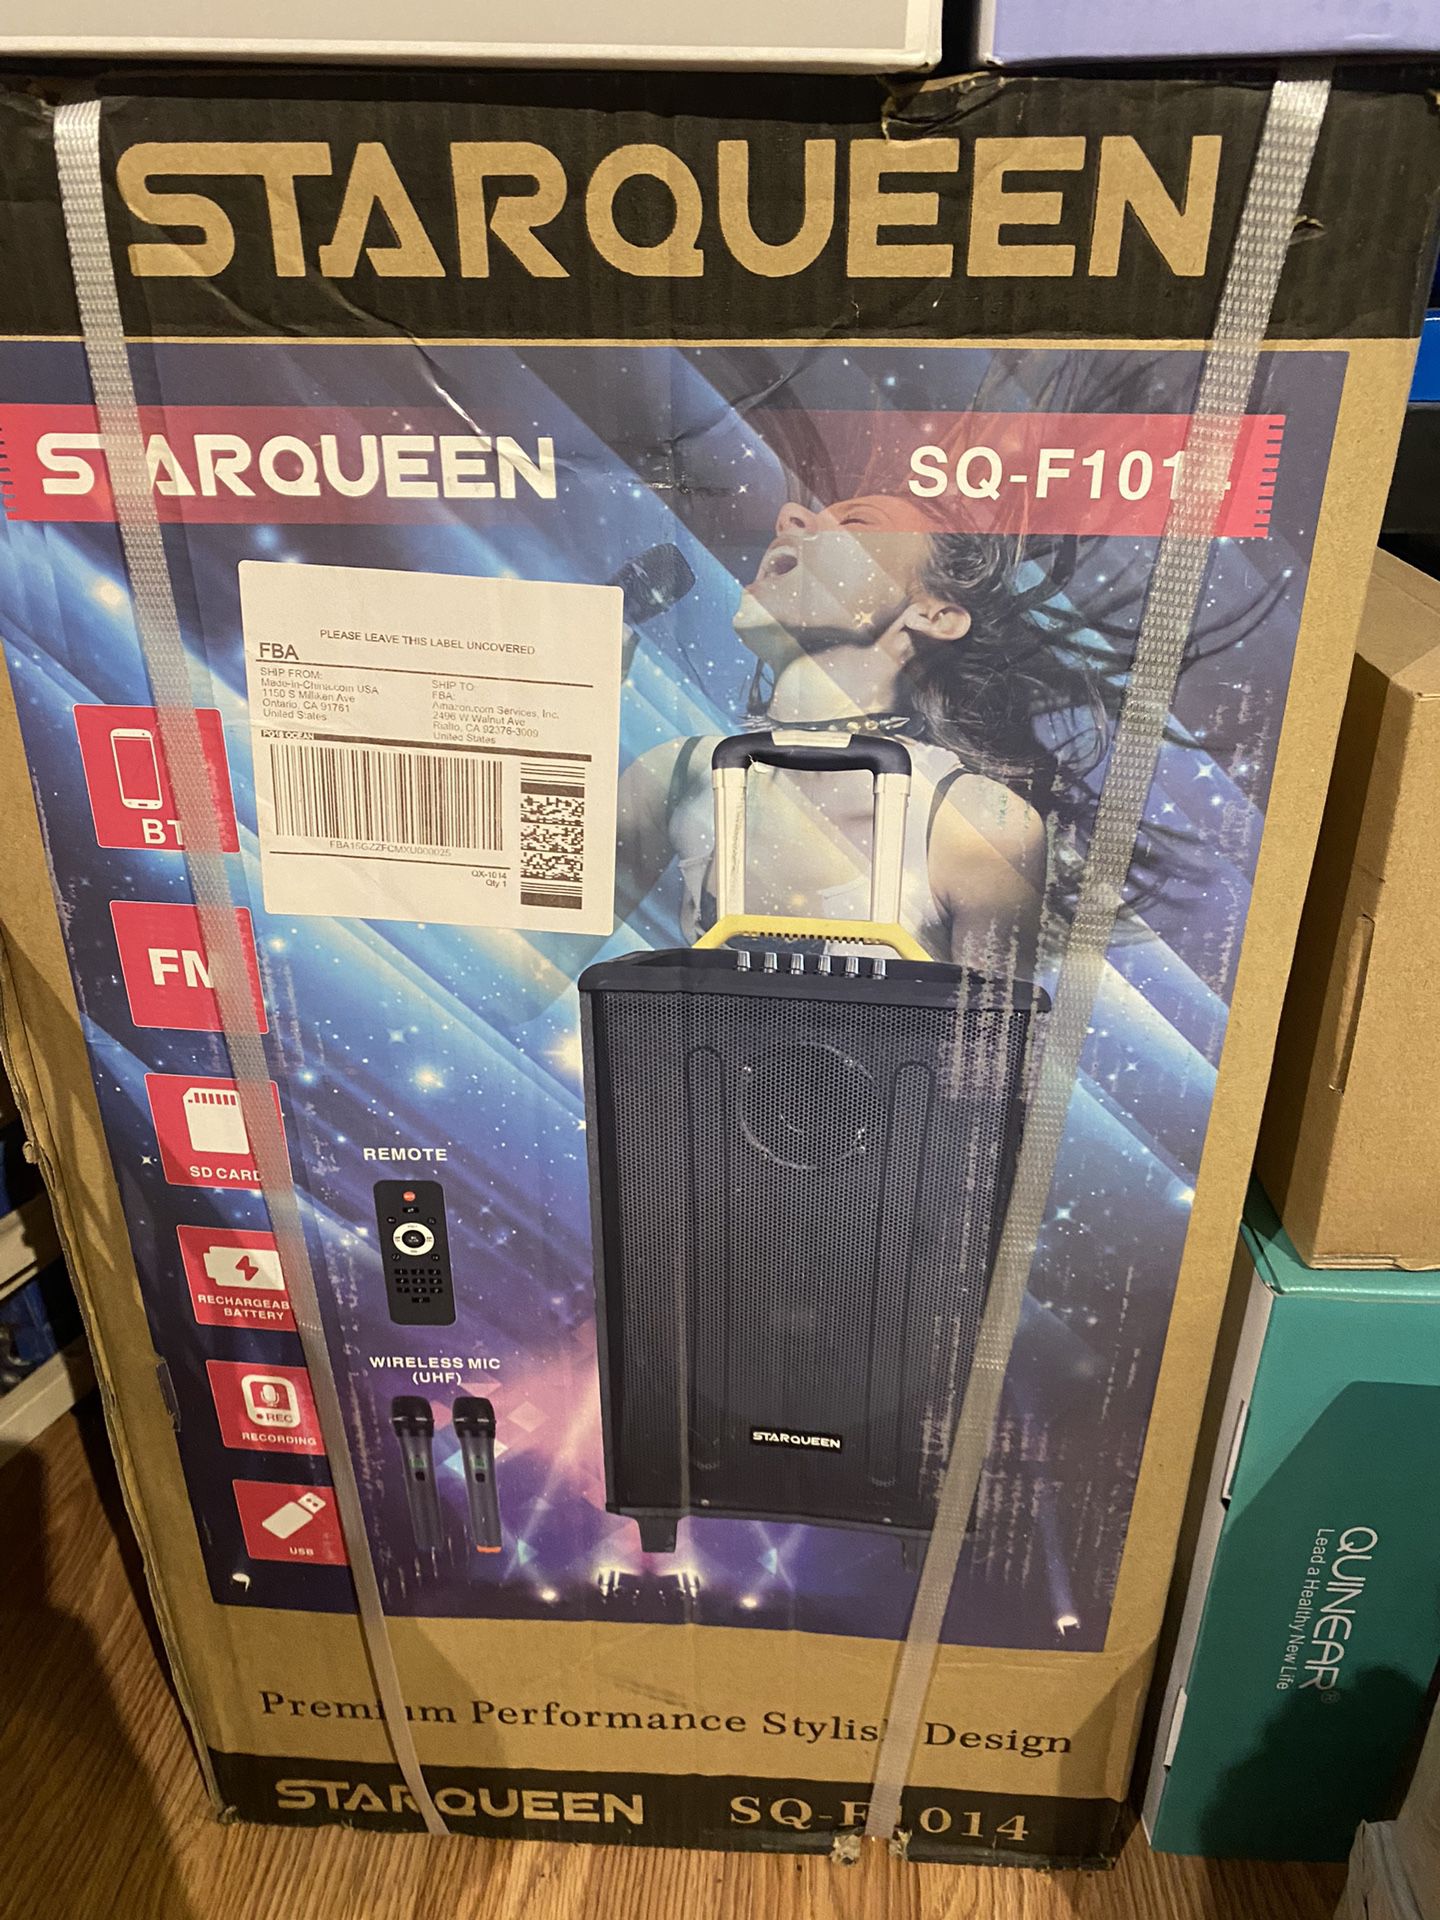 Starqueen karaoke machine Portable Karaoke Speaker for Adults and Kids 12” Woofer Rechargeable PA System with 2 Wireless Micorphone/Remote/Wheels/DJ L